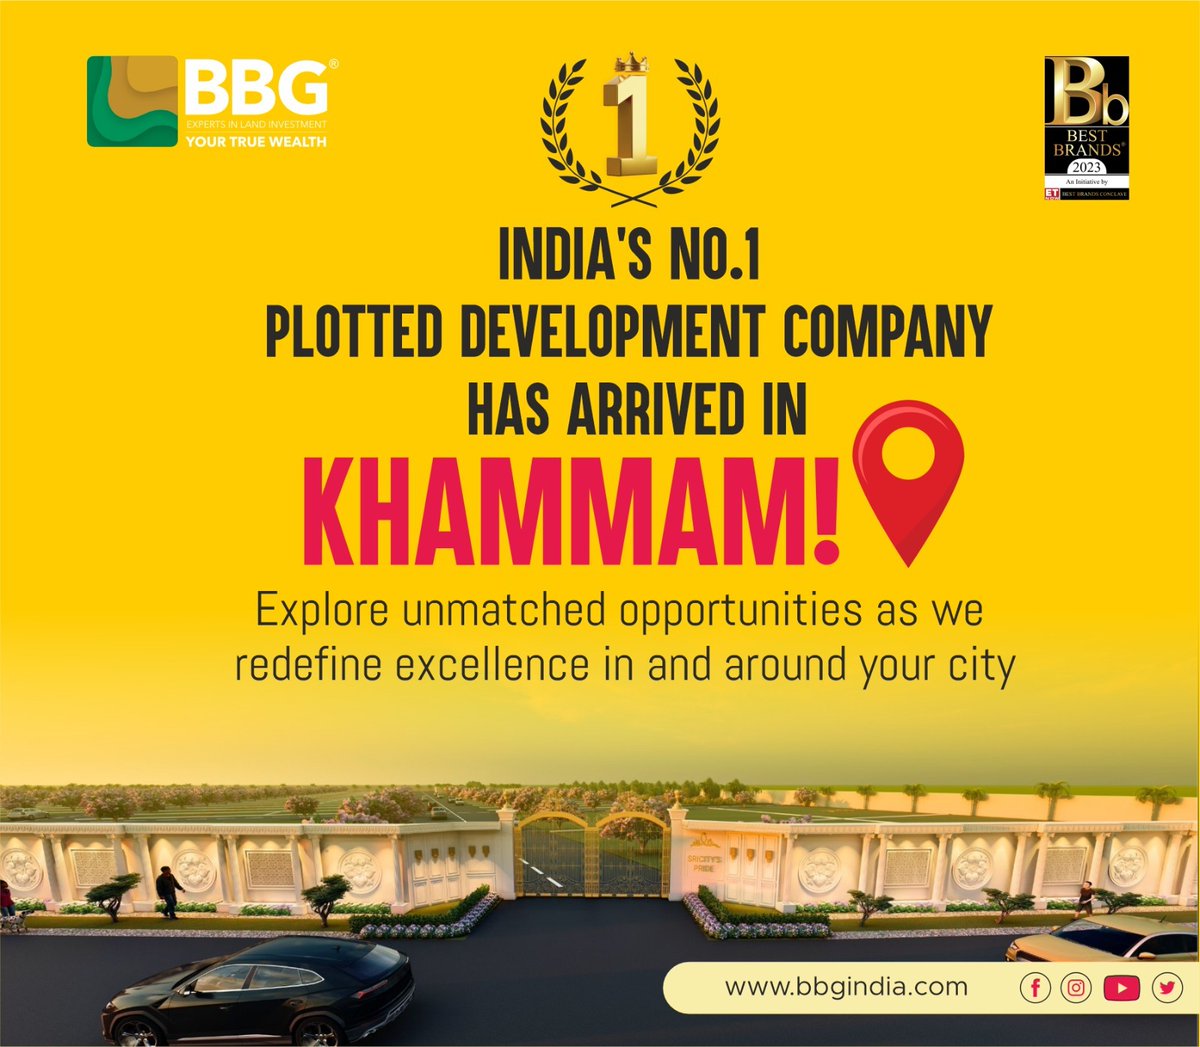 🎉 Exciting News Alert! 🏡🌟 We're thrilled to announce that India's No.1 plotted real estate company has arrived in Khammam! 🎉 🏠🔑 #RealEstate #PlottedDevelopment #Khammam #DreamPlot #Opportunities #Excellence